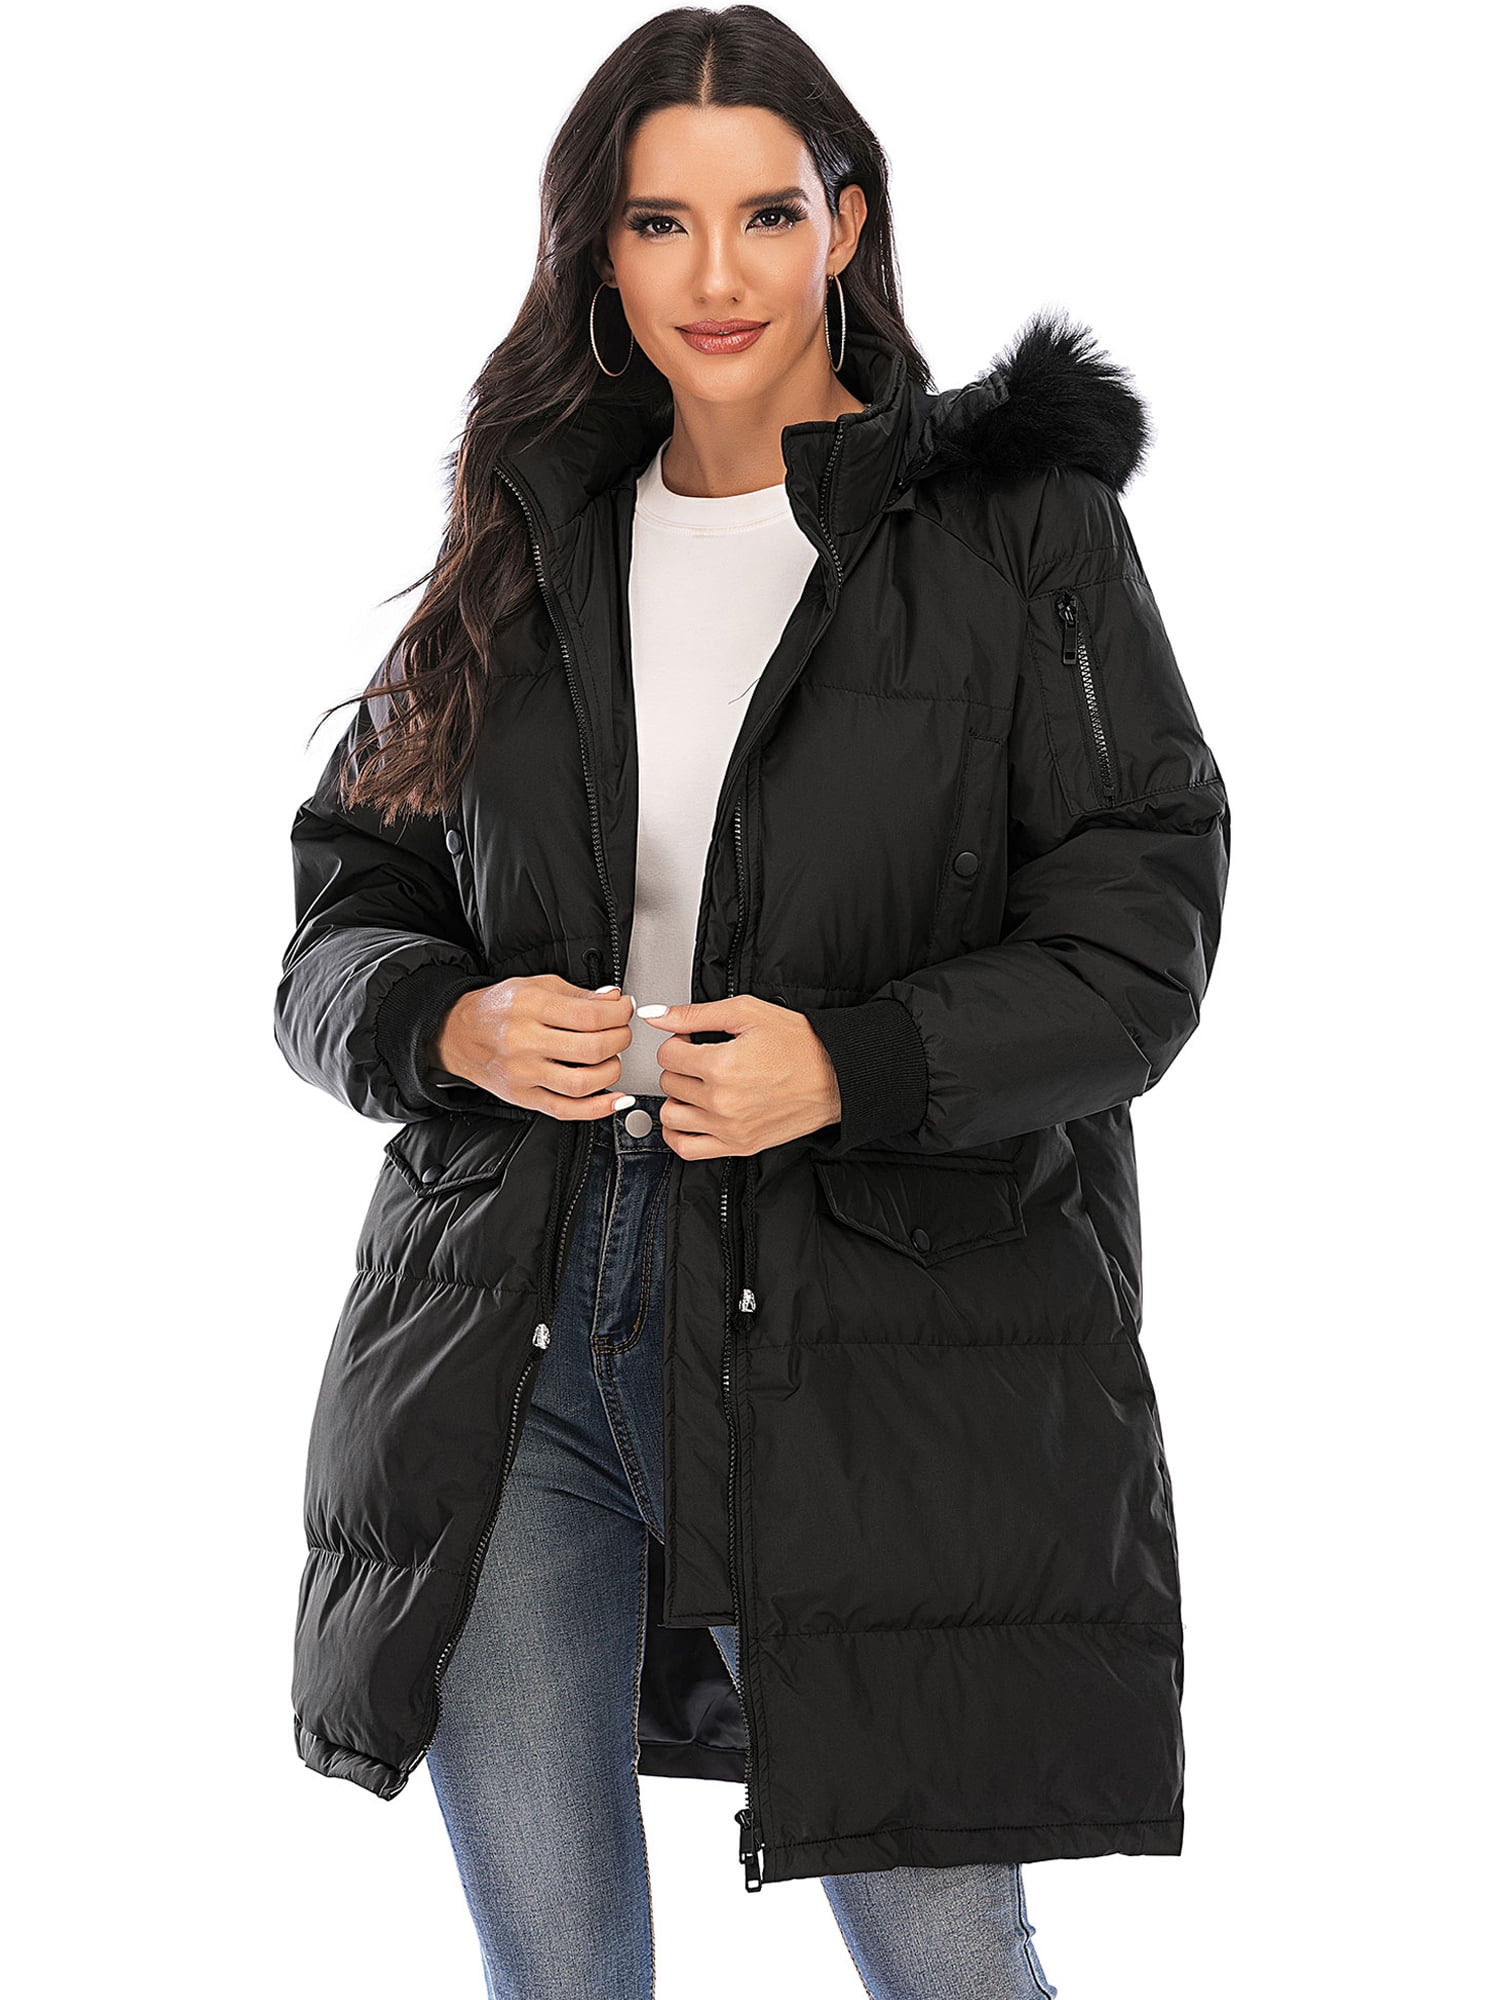 Womens Winter Hooded Coat Water-Resistant Warm Long Puffer Quilted Jacket Parka with Fur Trim 